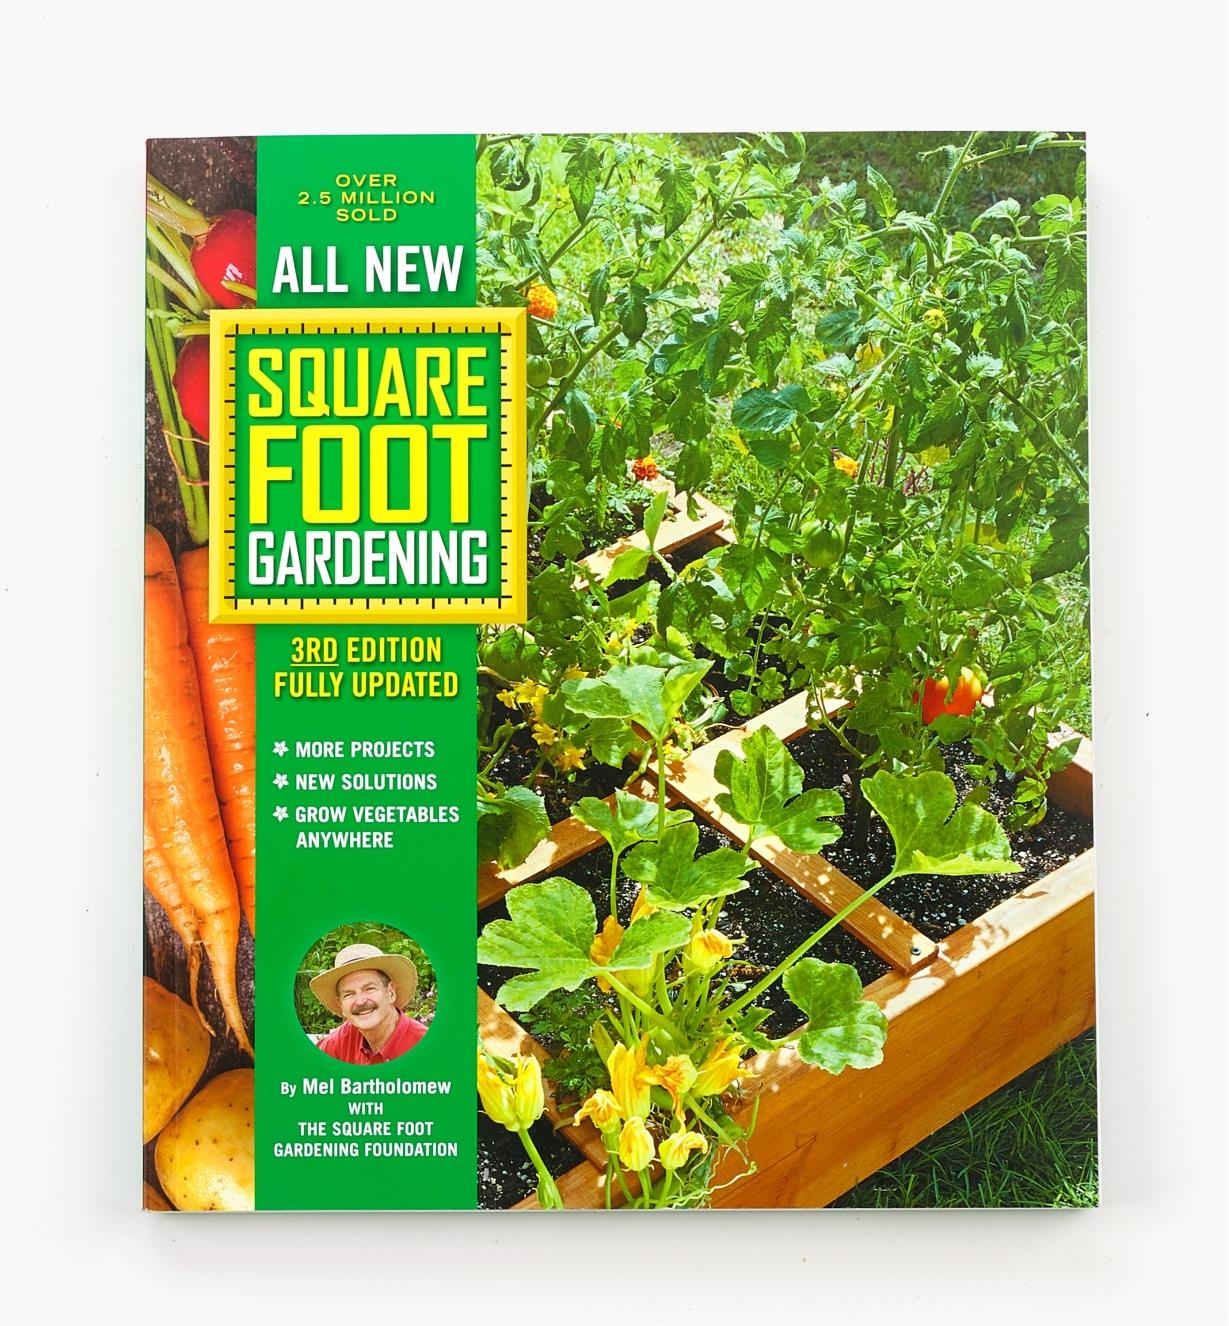 LA834 - All New Square Foot Gardening, 3rd Edition